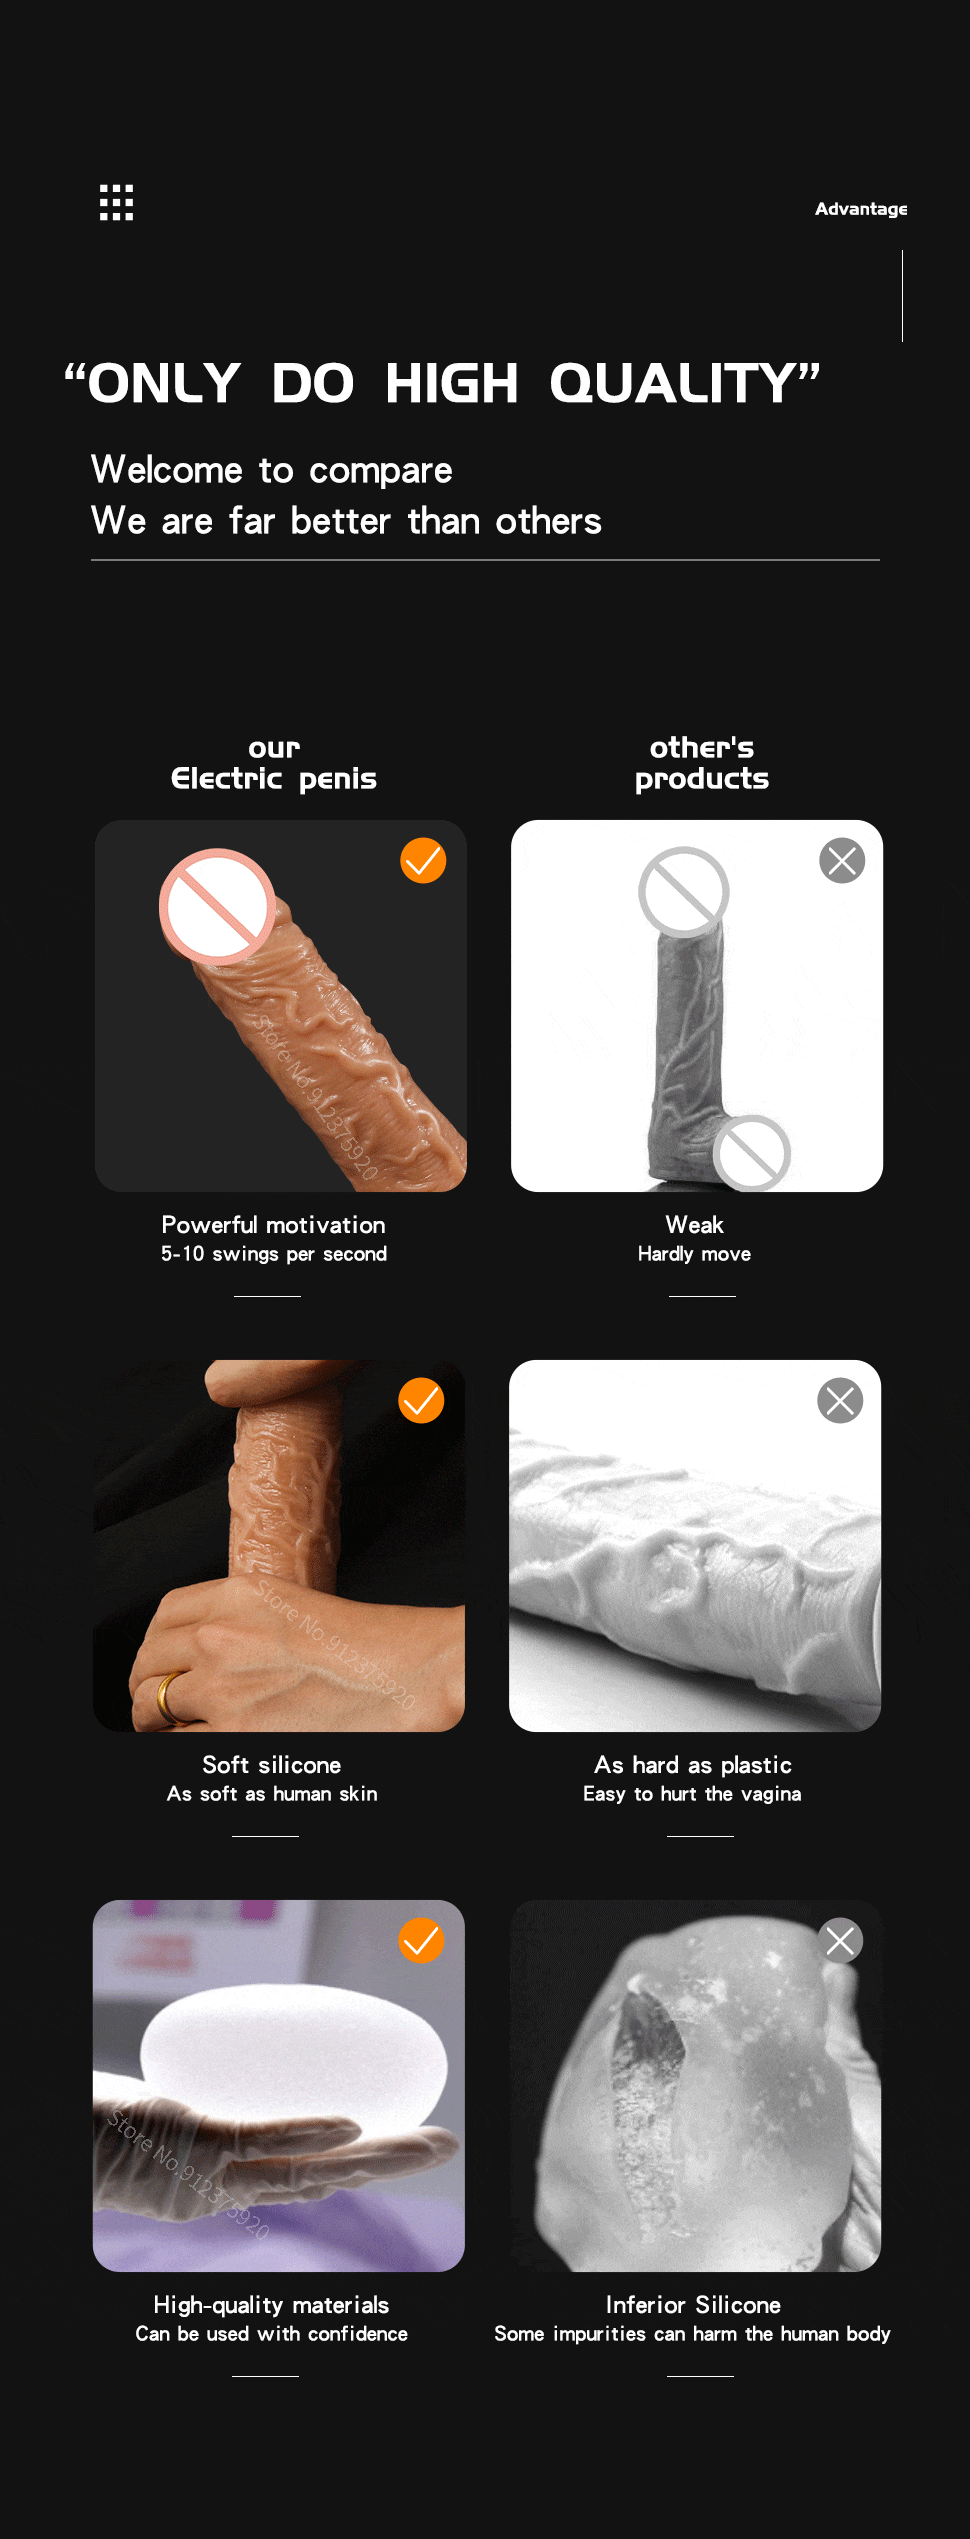 so real 8 inch realistic dildo high quality